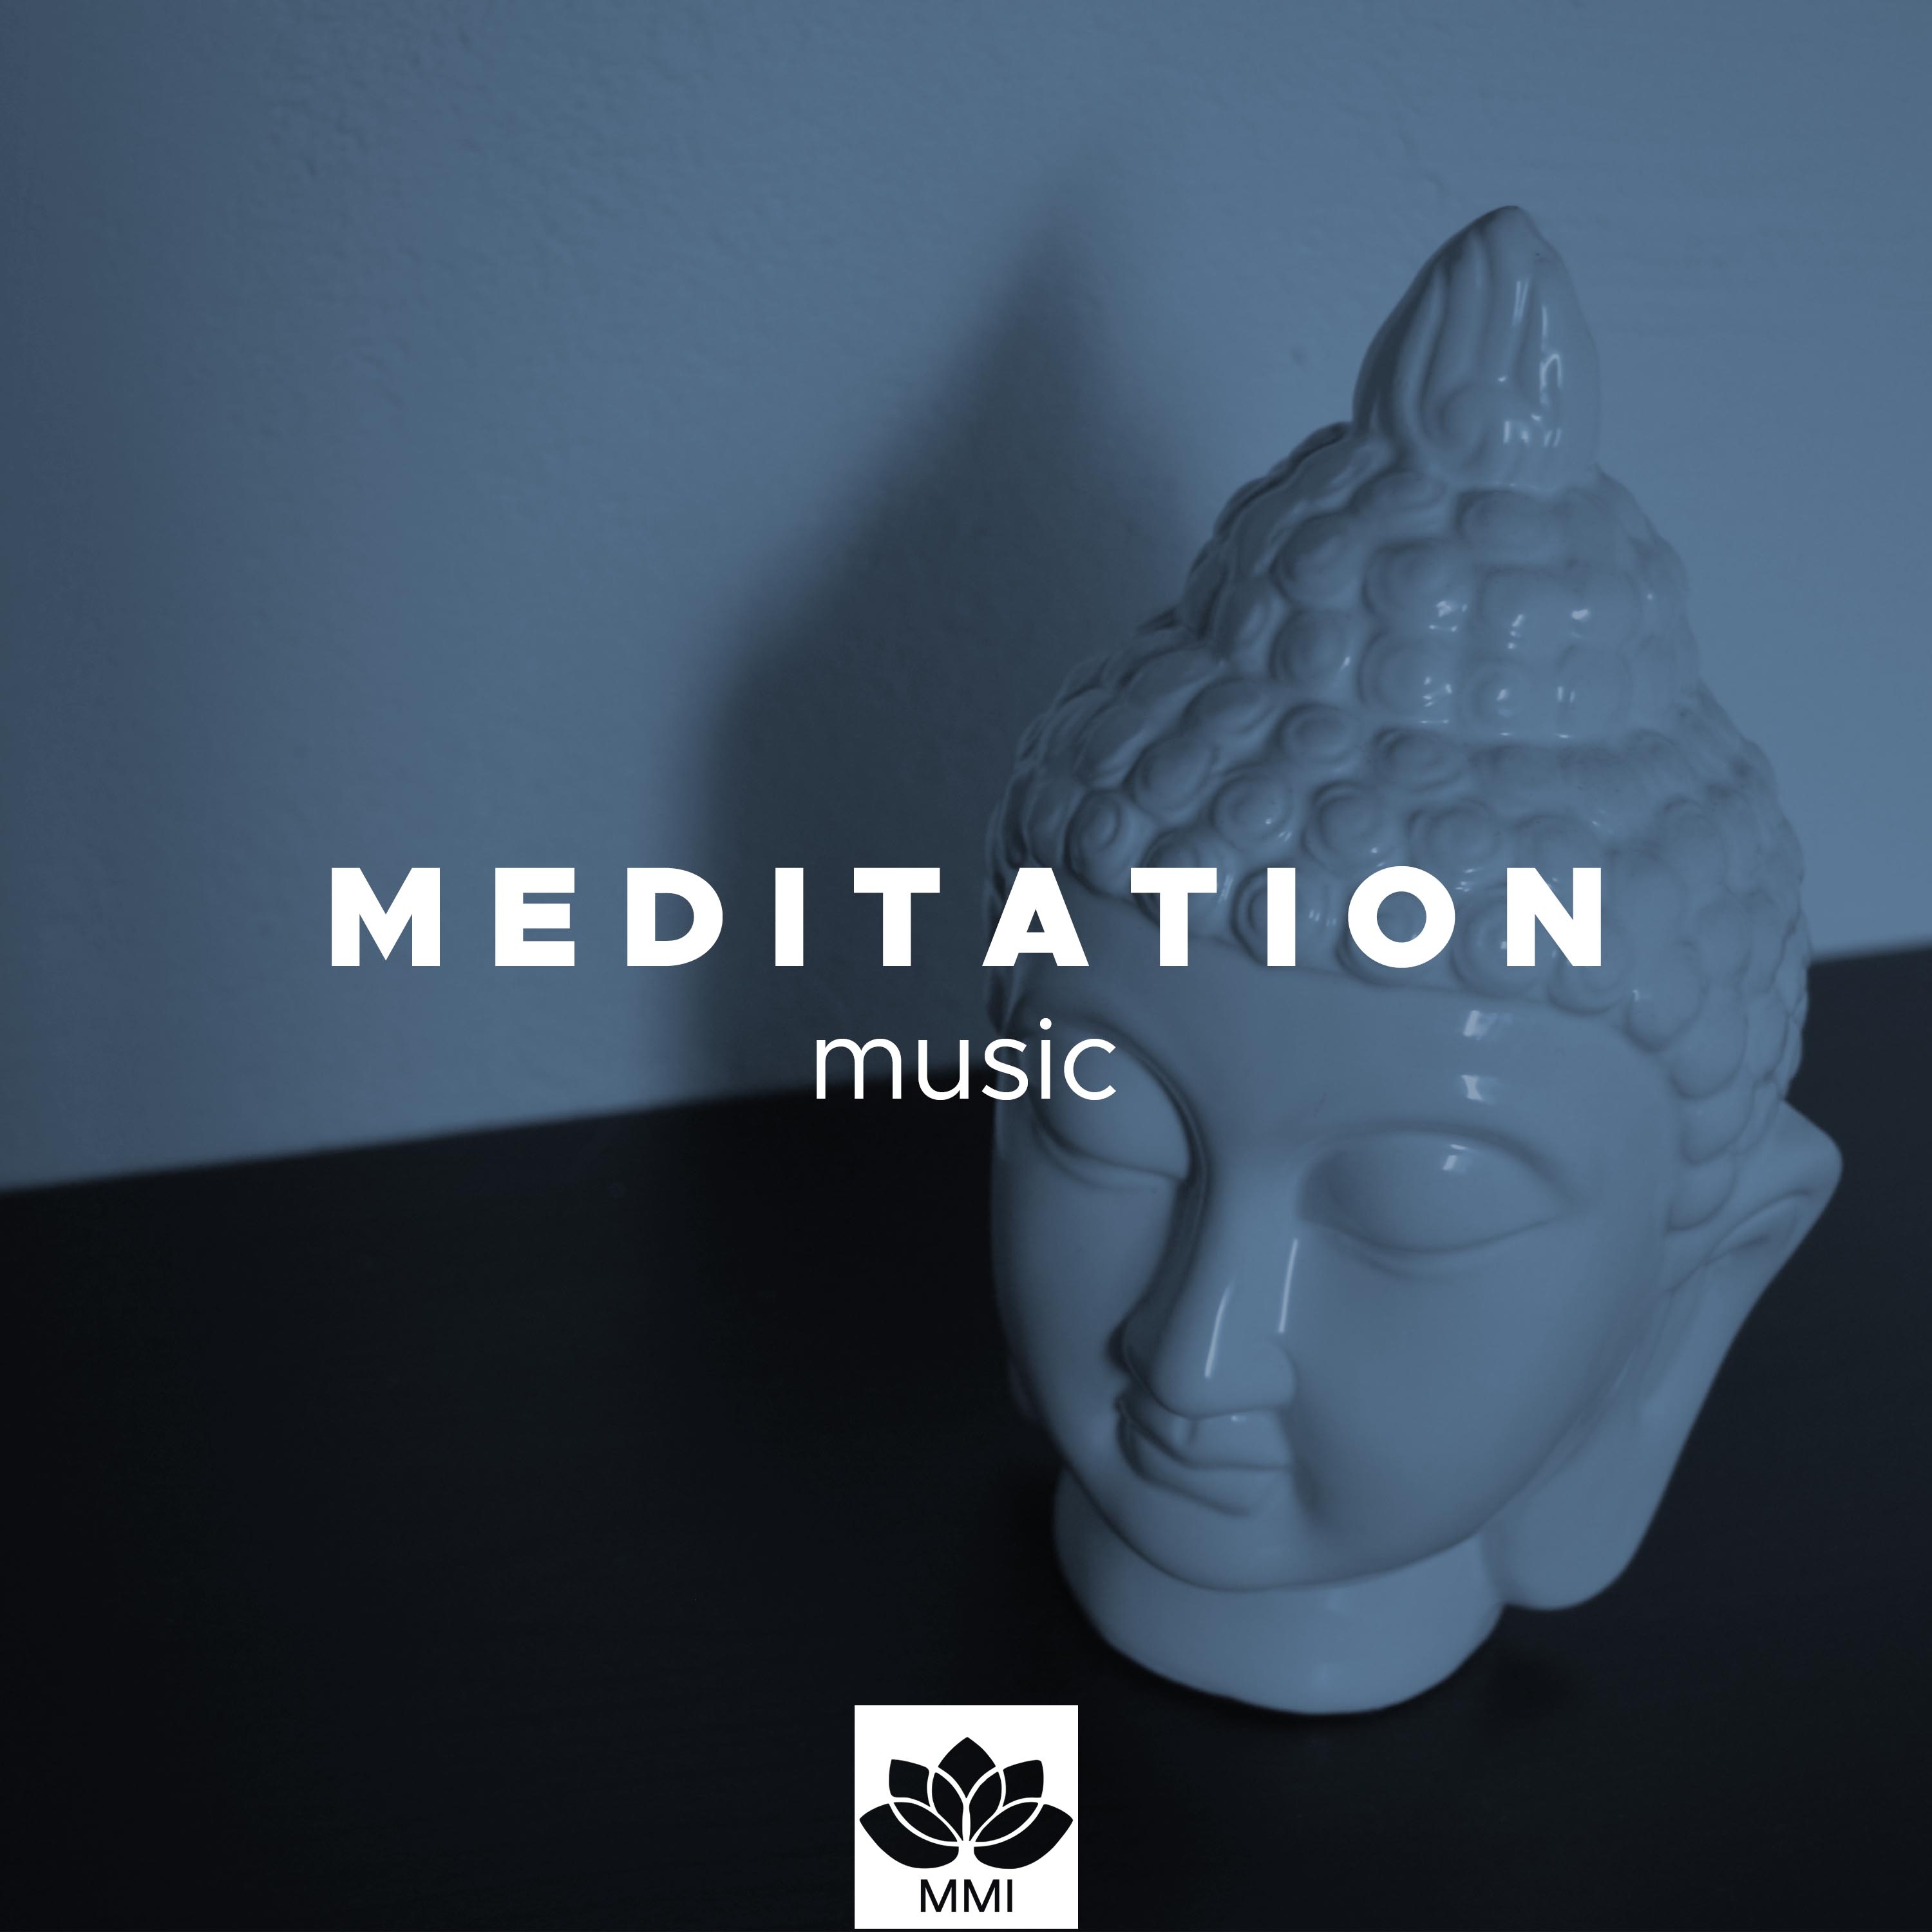 Meditation Music for Relaxation: Buddhist Meditation, Yoga Meditation, Daily Meditation, Meditation Exercises, Nature Sounds